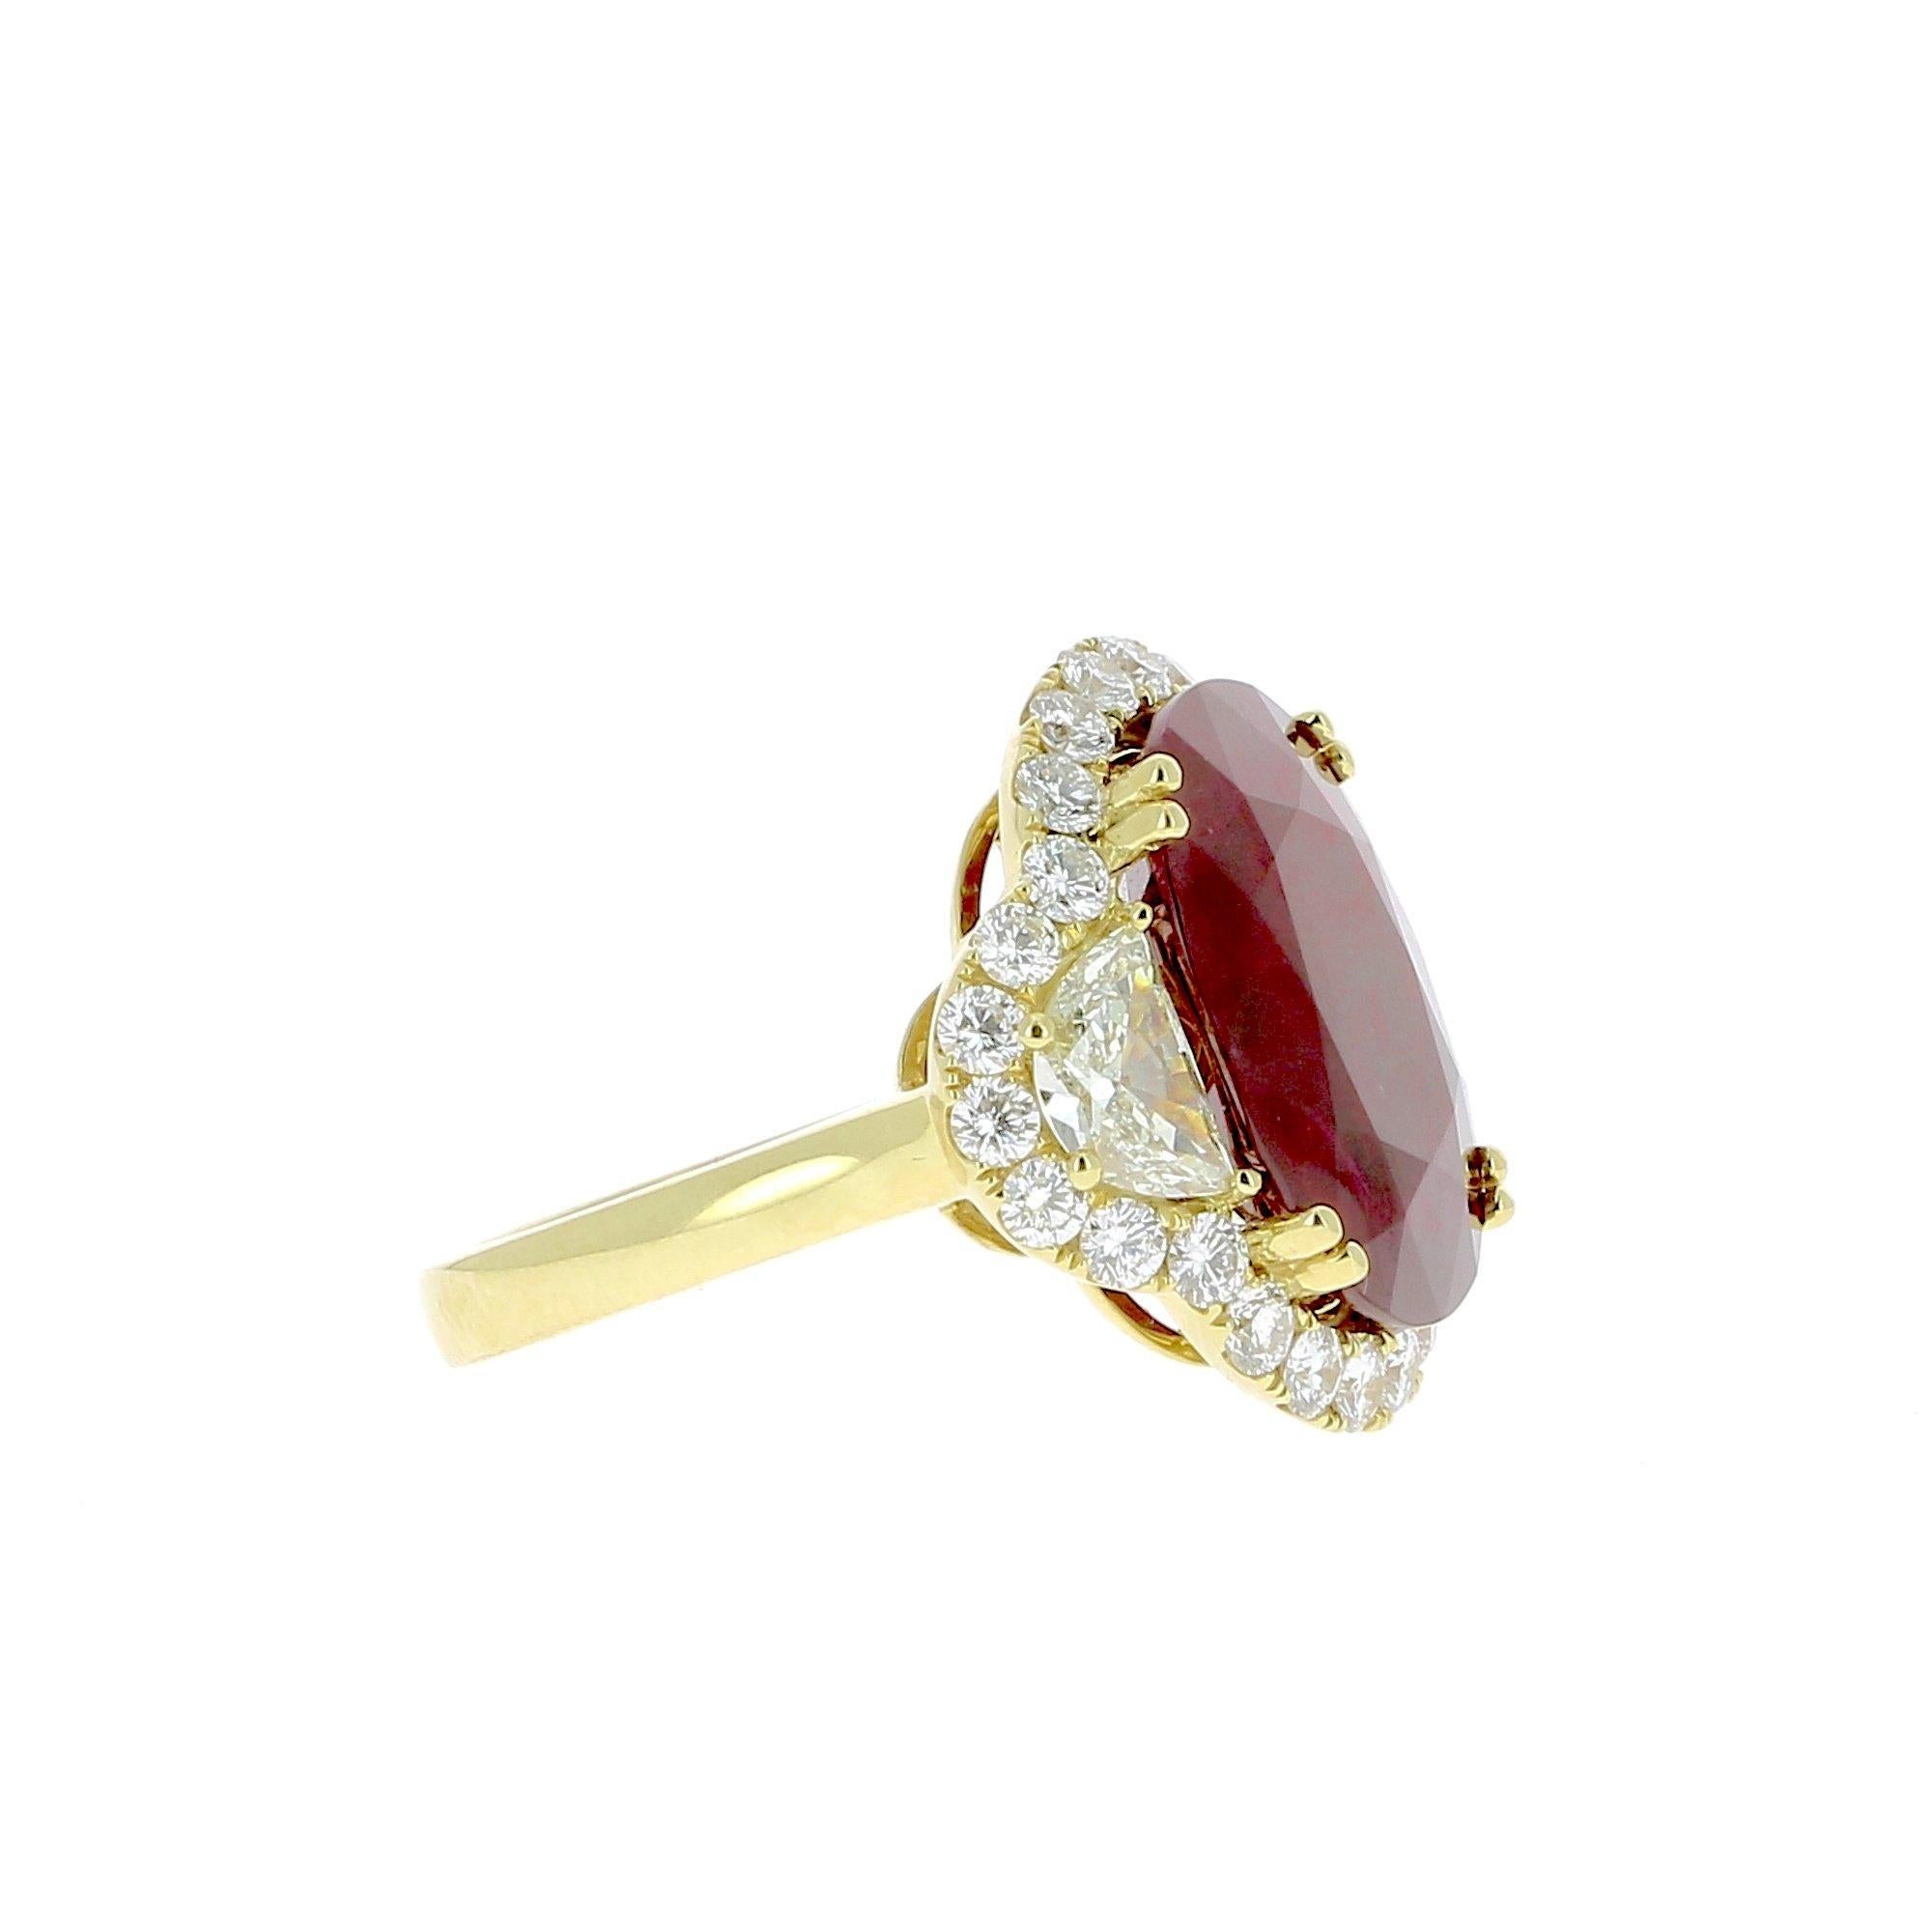 Contemporary 12.52 Carat Oval Natural Ruby Cocktail Ring Half-Moon Diamonds 18K Yellow Gold 